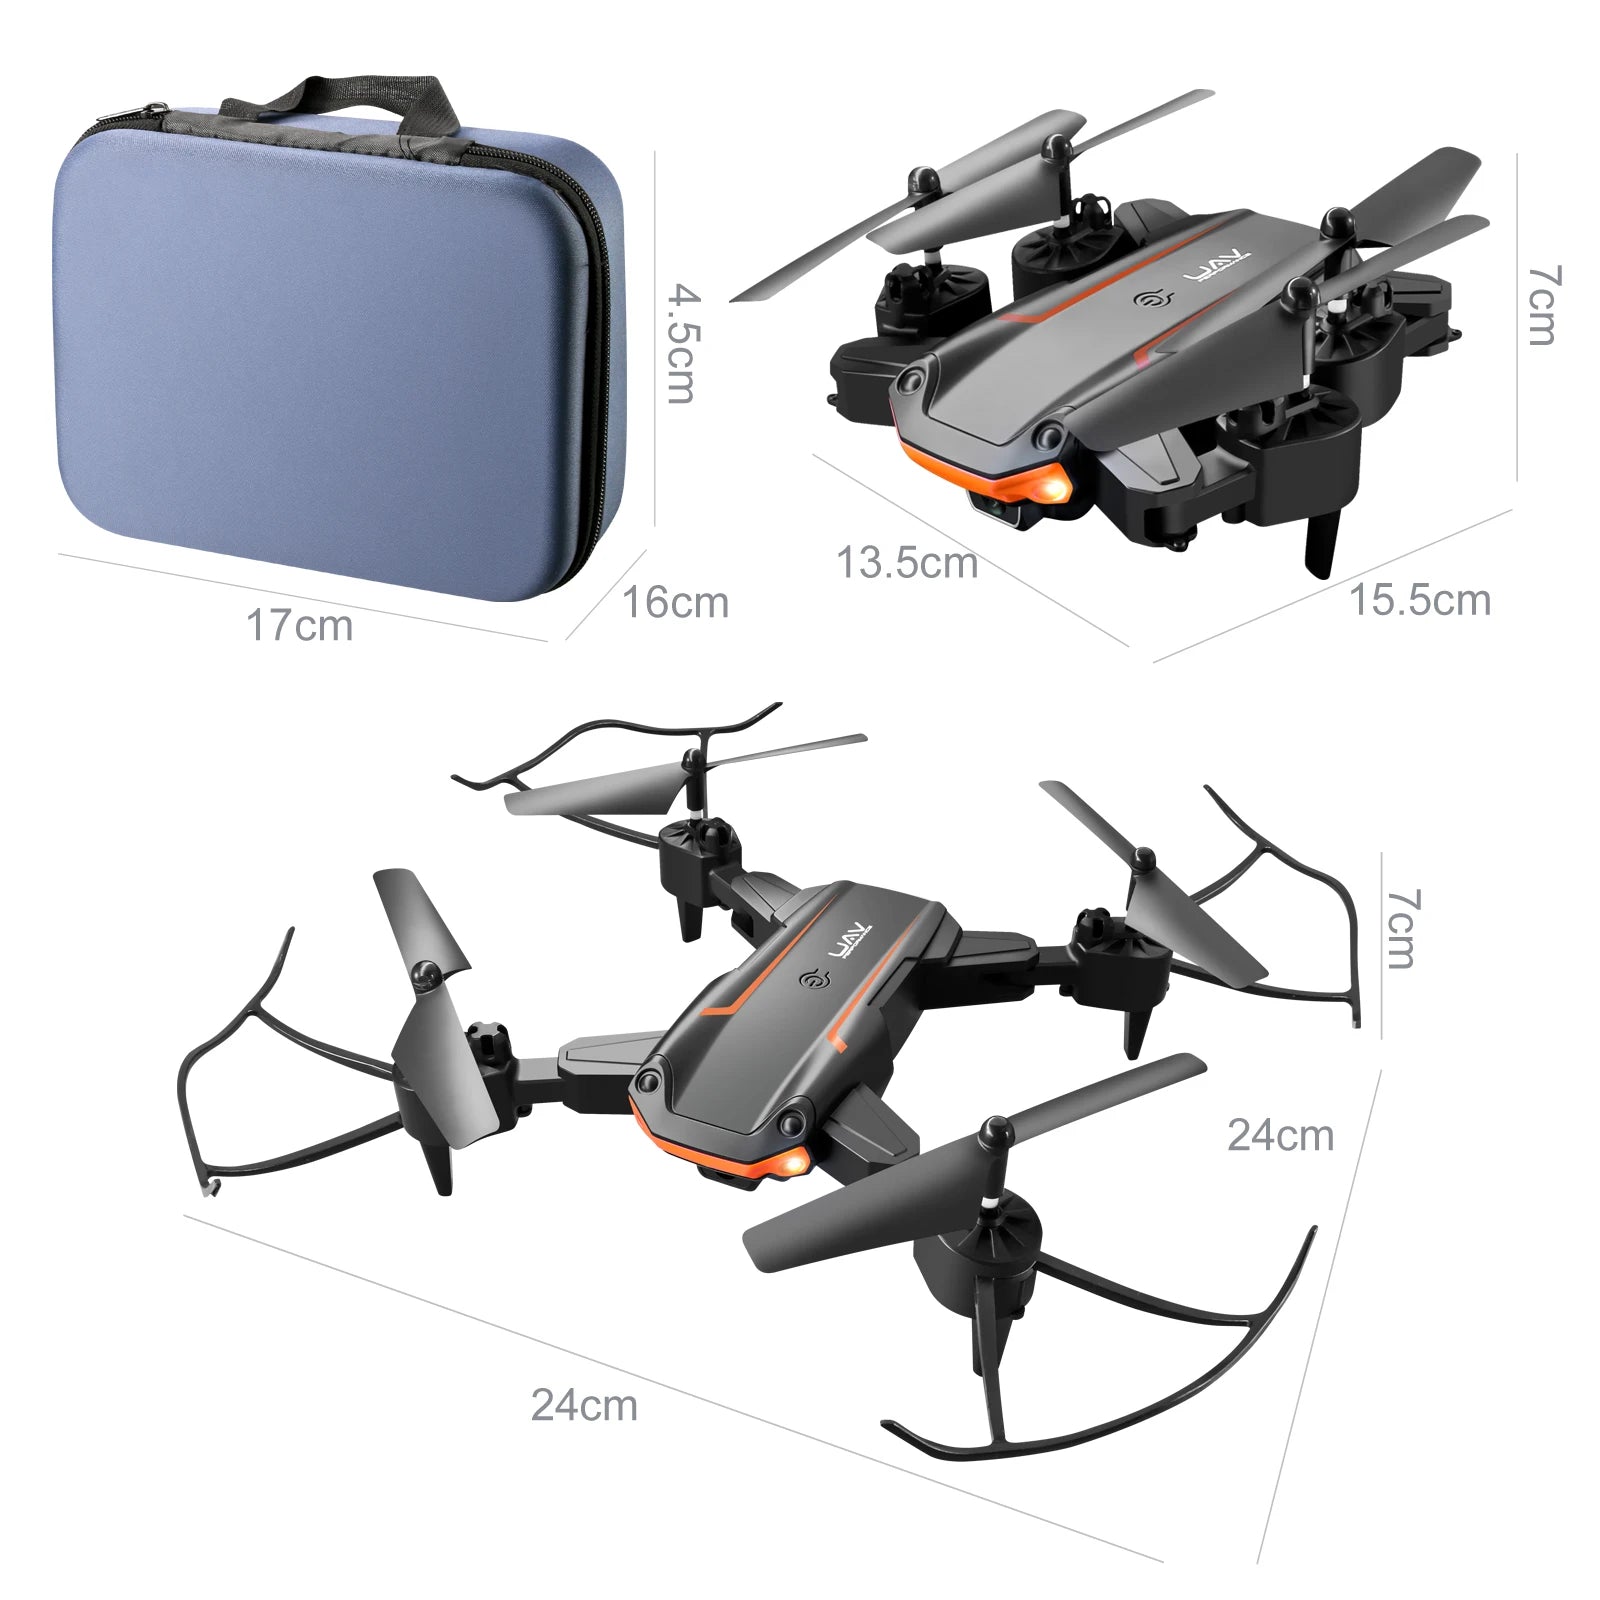 XYRC New KY603 Mini Drone, app-controlled drone battery : 3.7v 1800mah